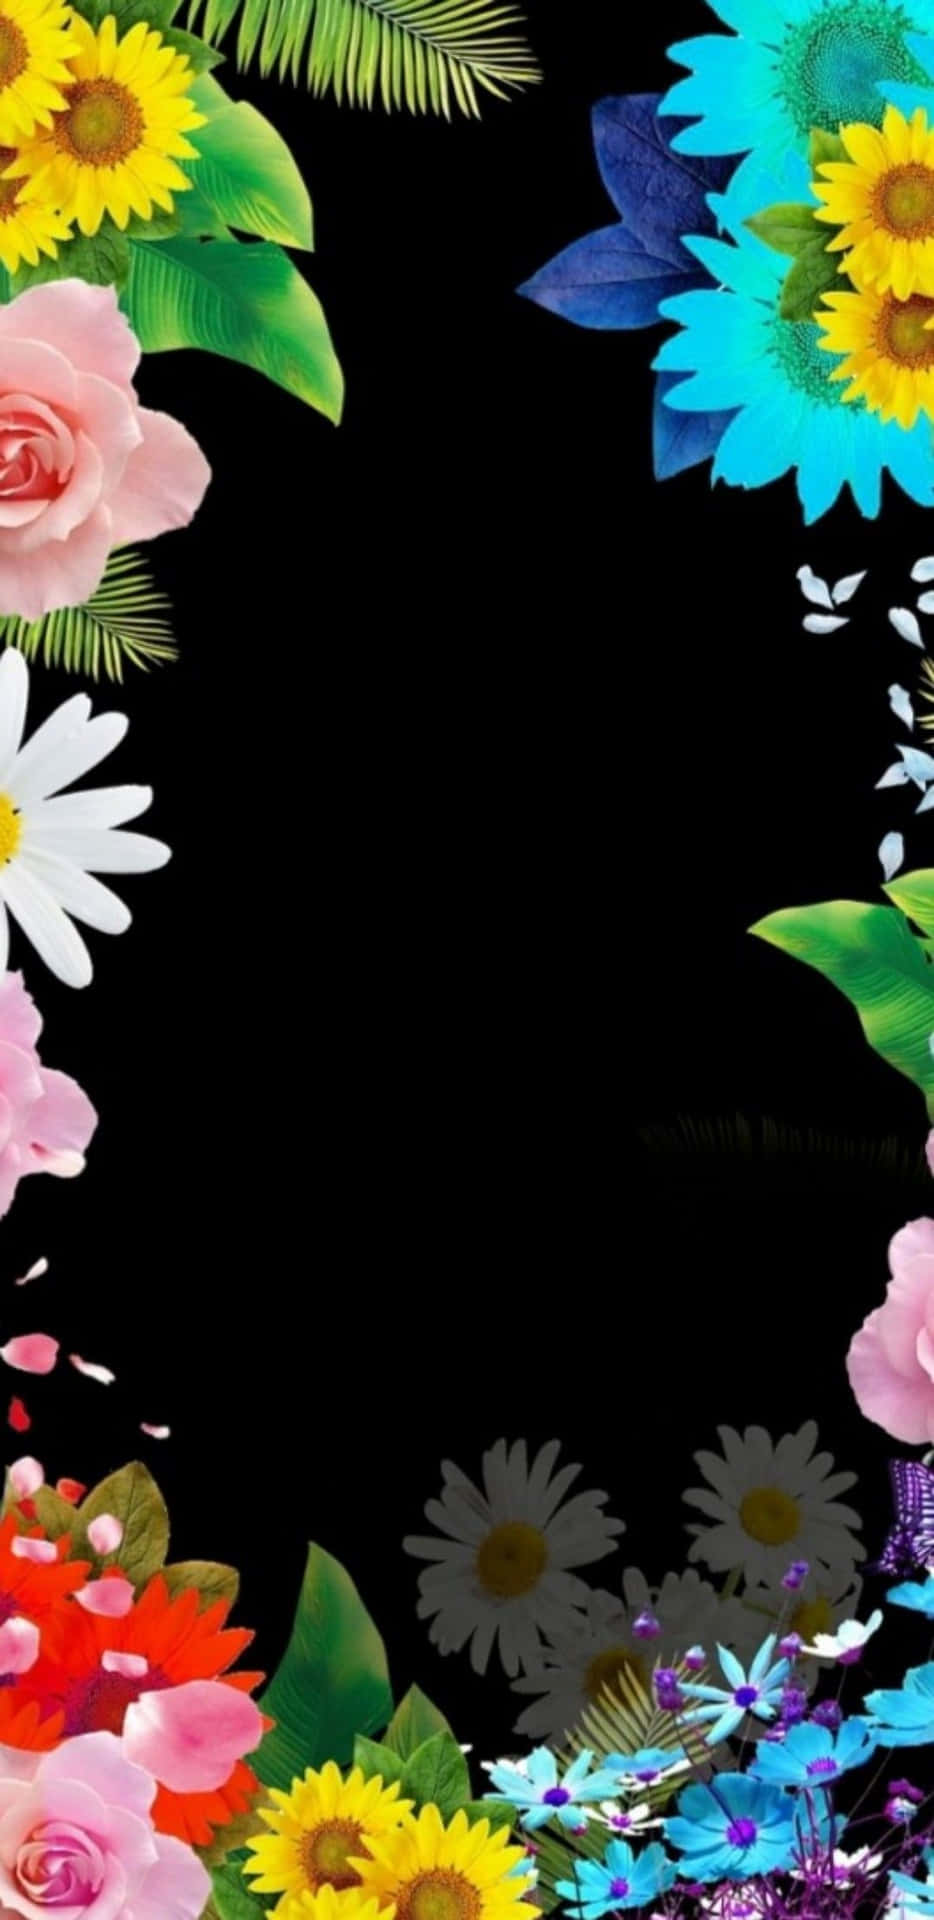 "A Wall of Colorful Flowers Looms Behind an Iphone" Wallpaper